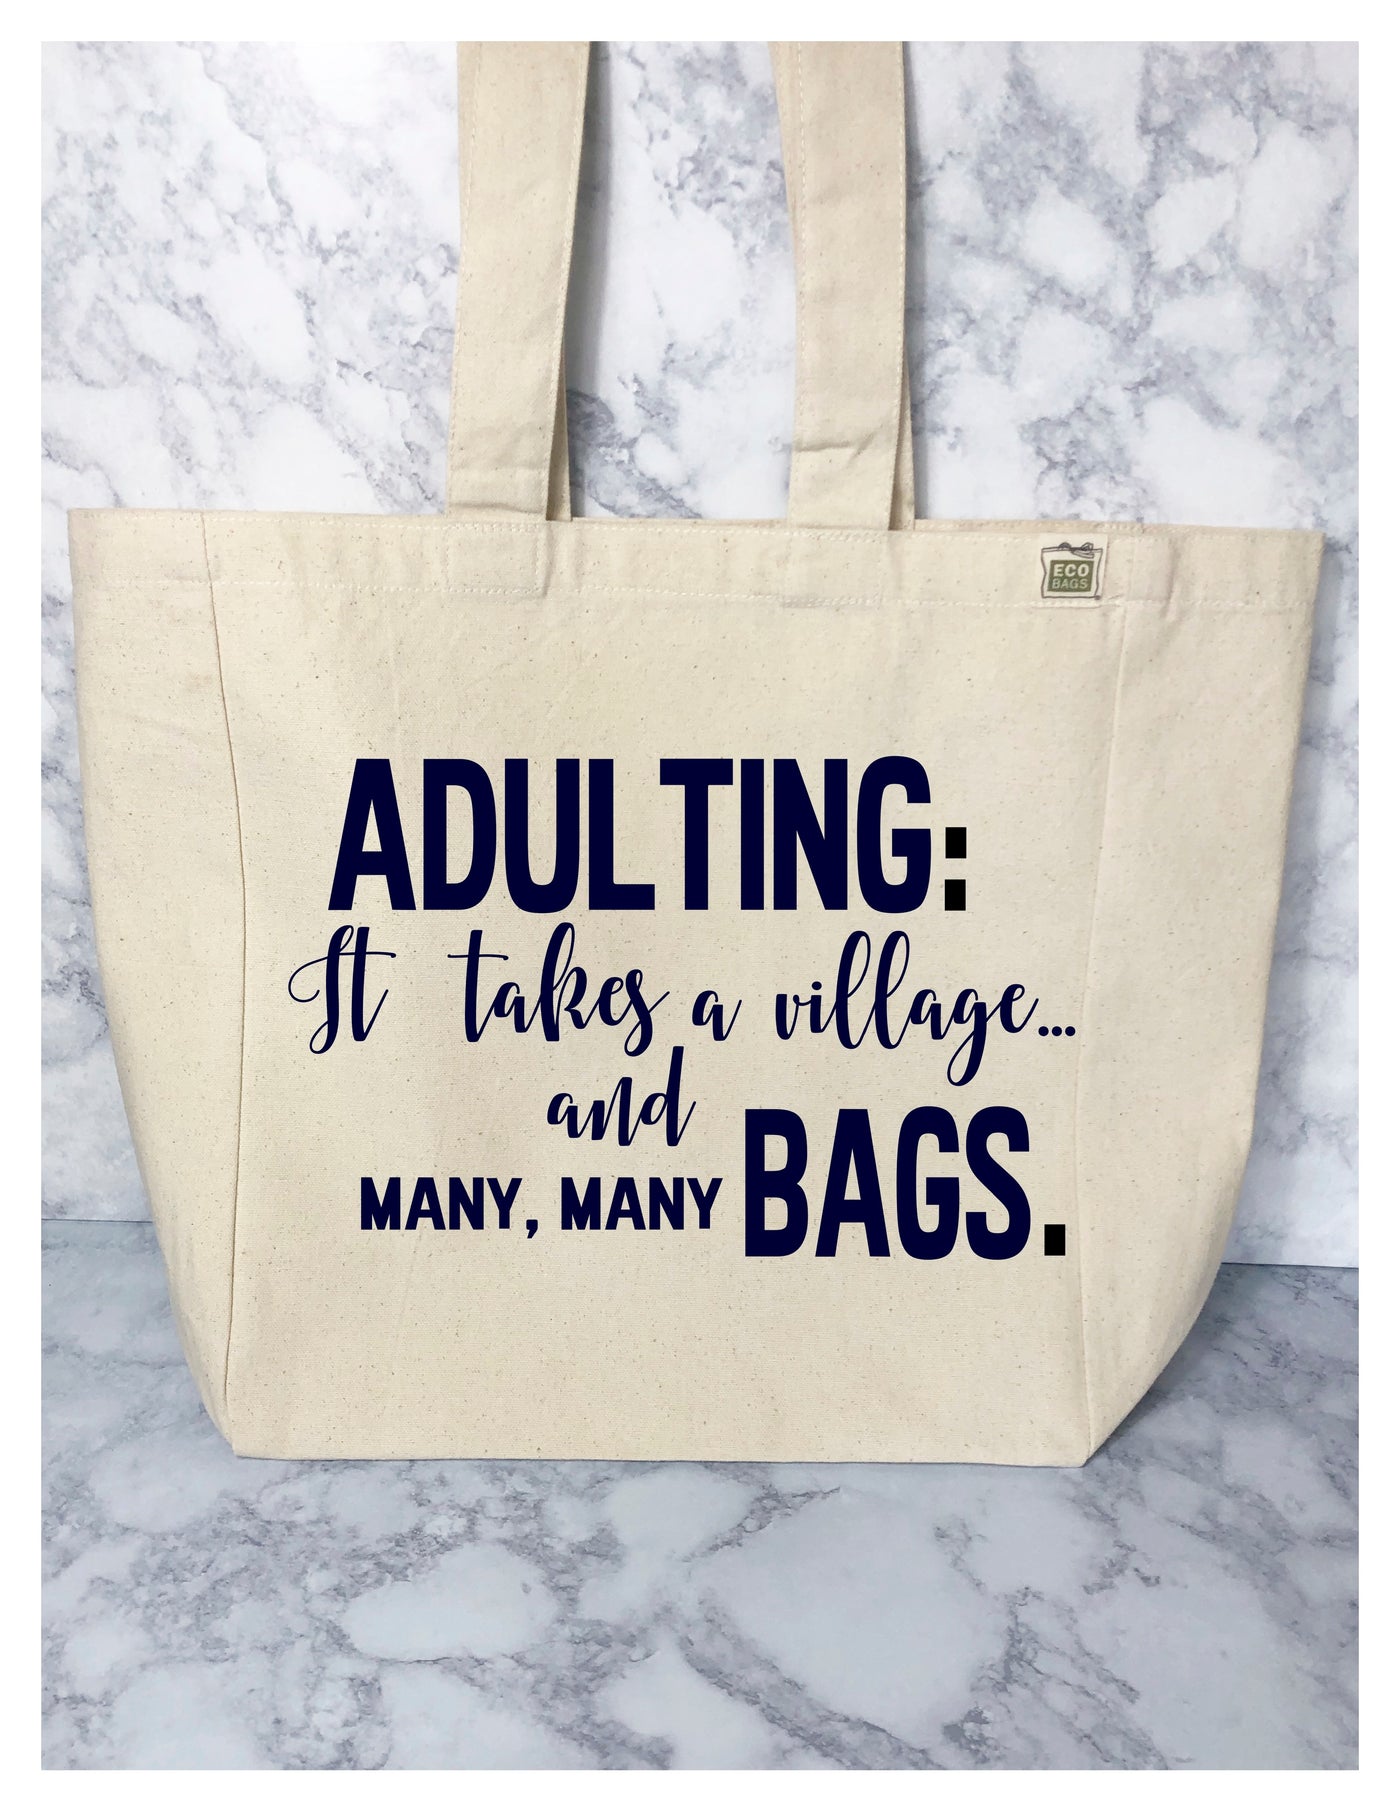 adulting takes many many bags - tote bag